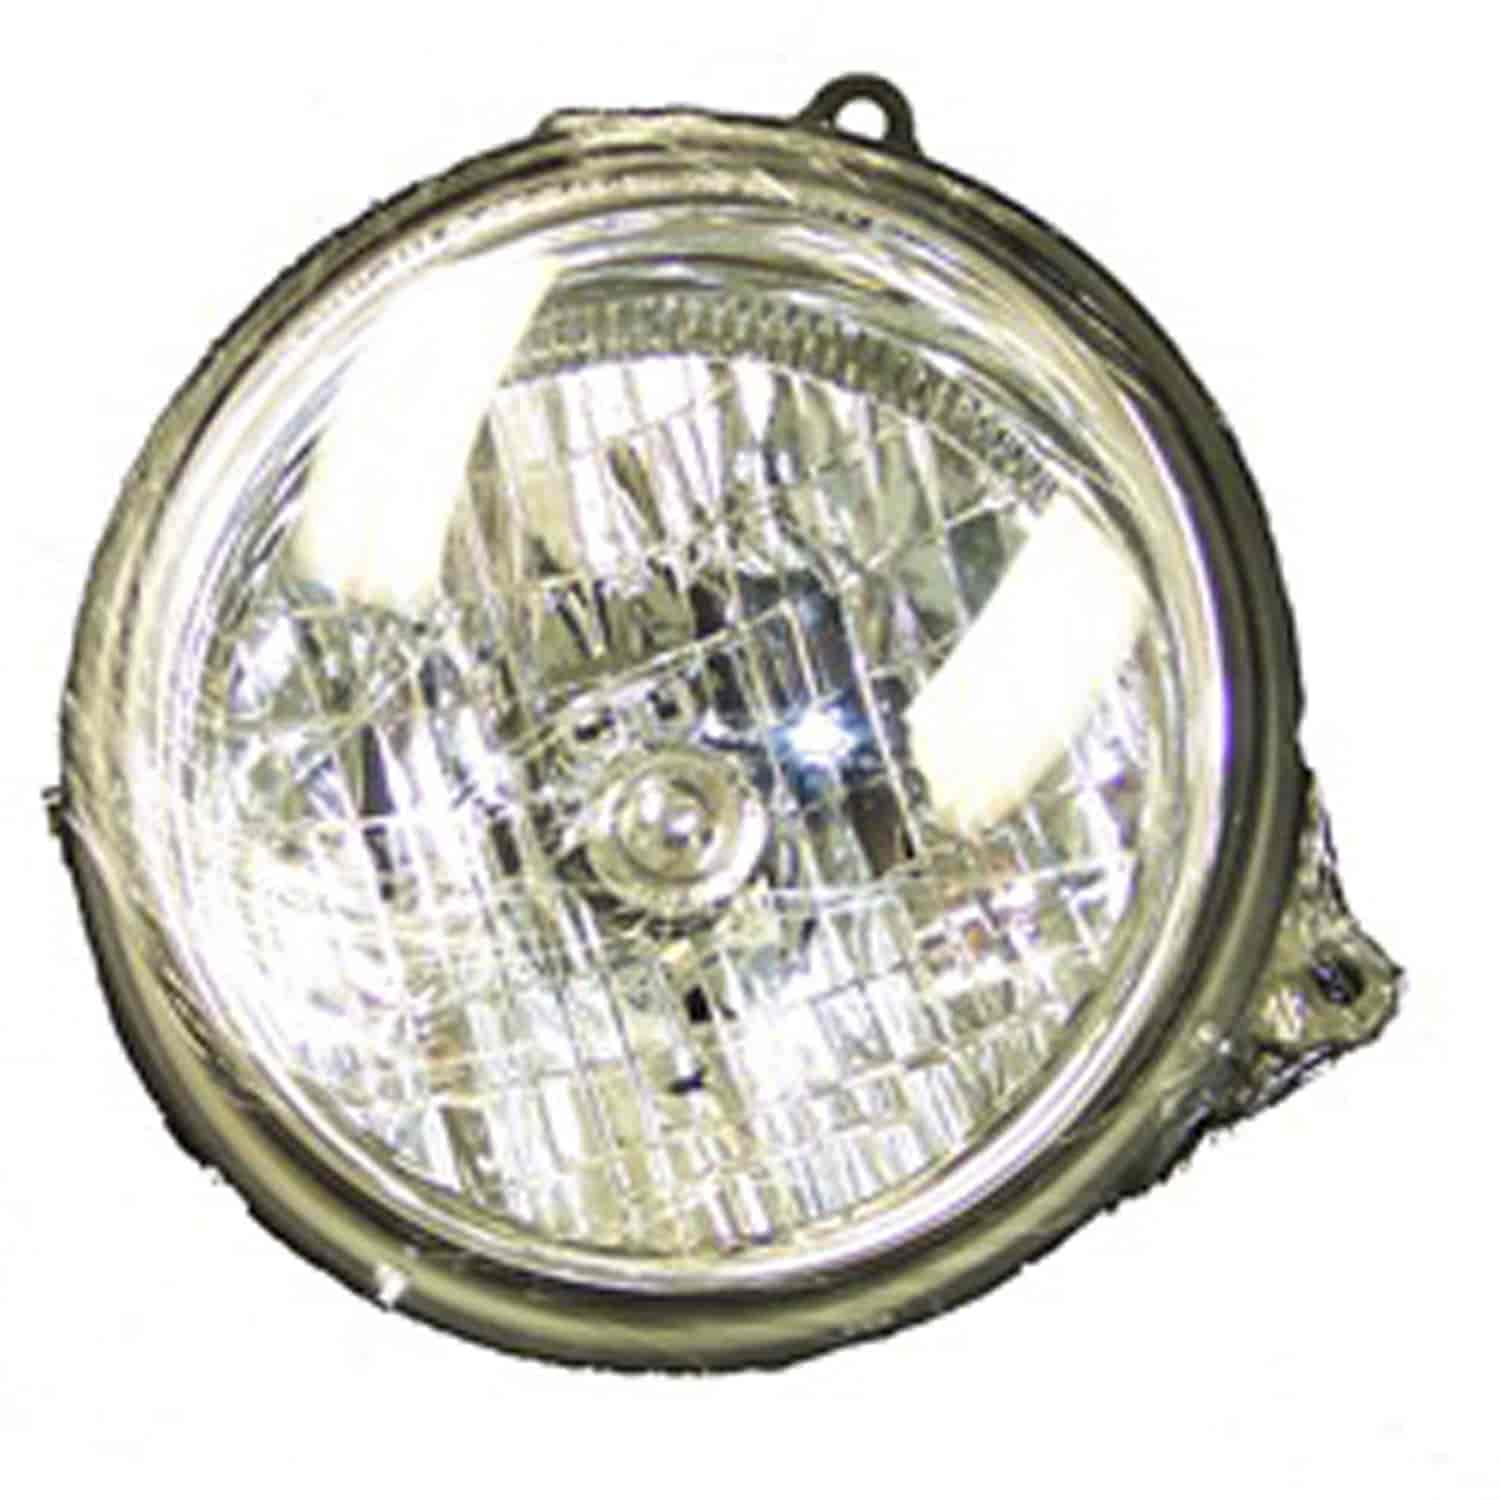 Replacement headlight assembly from Omix-ADA, Fits left side